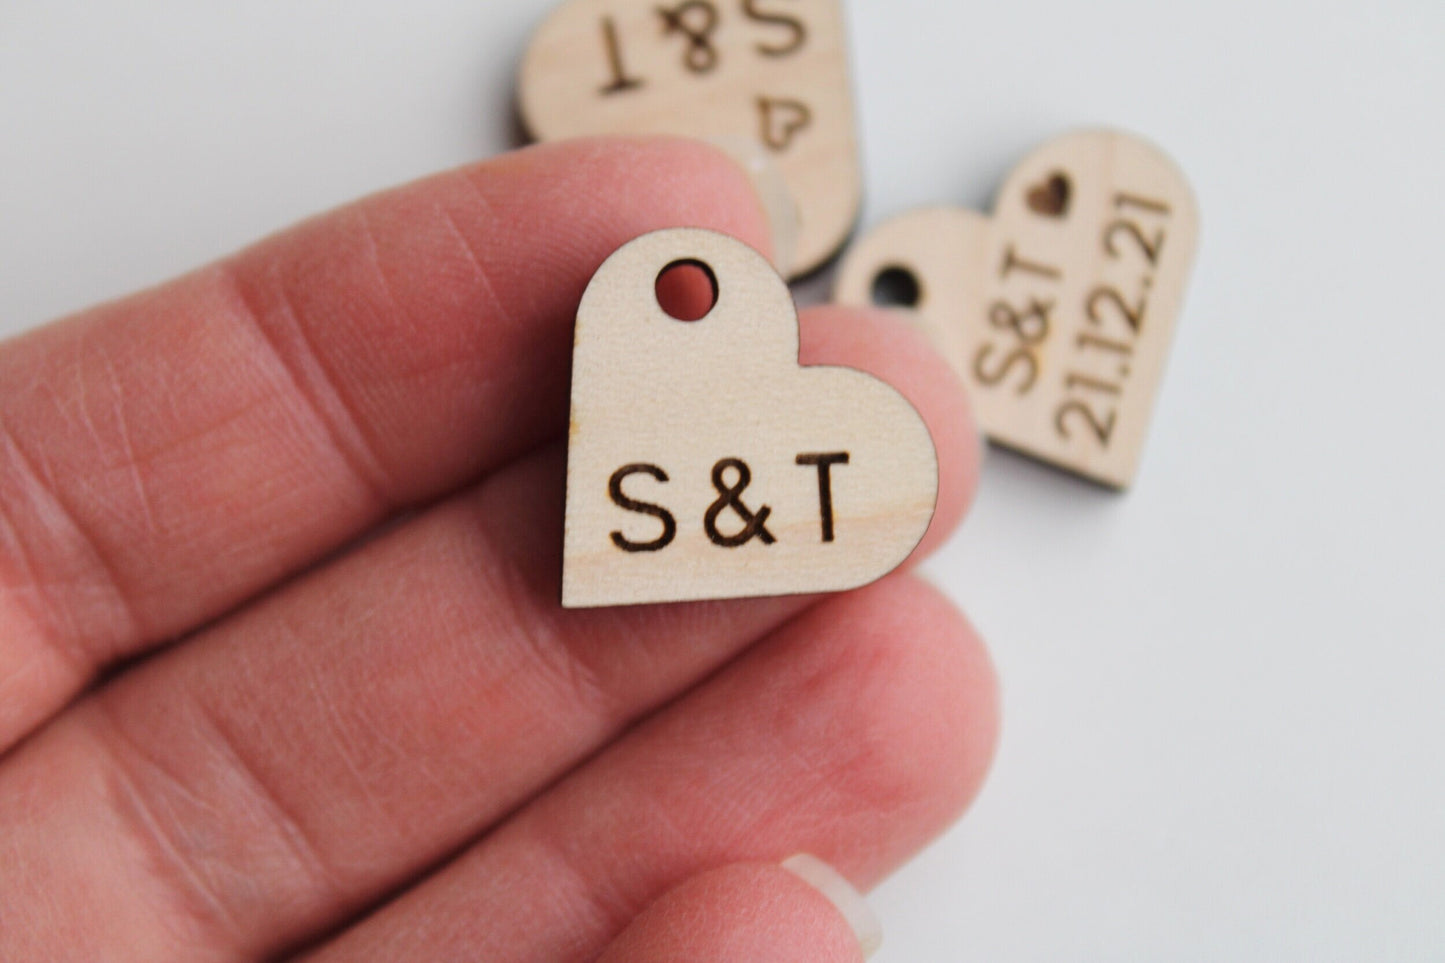 Wooden wedding favour tags engraved with initials